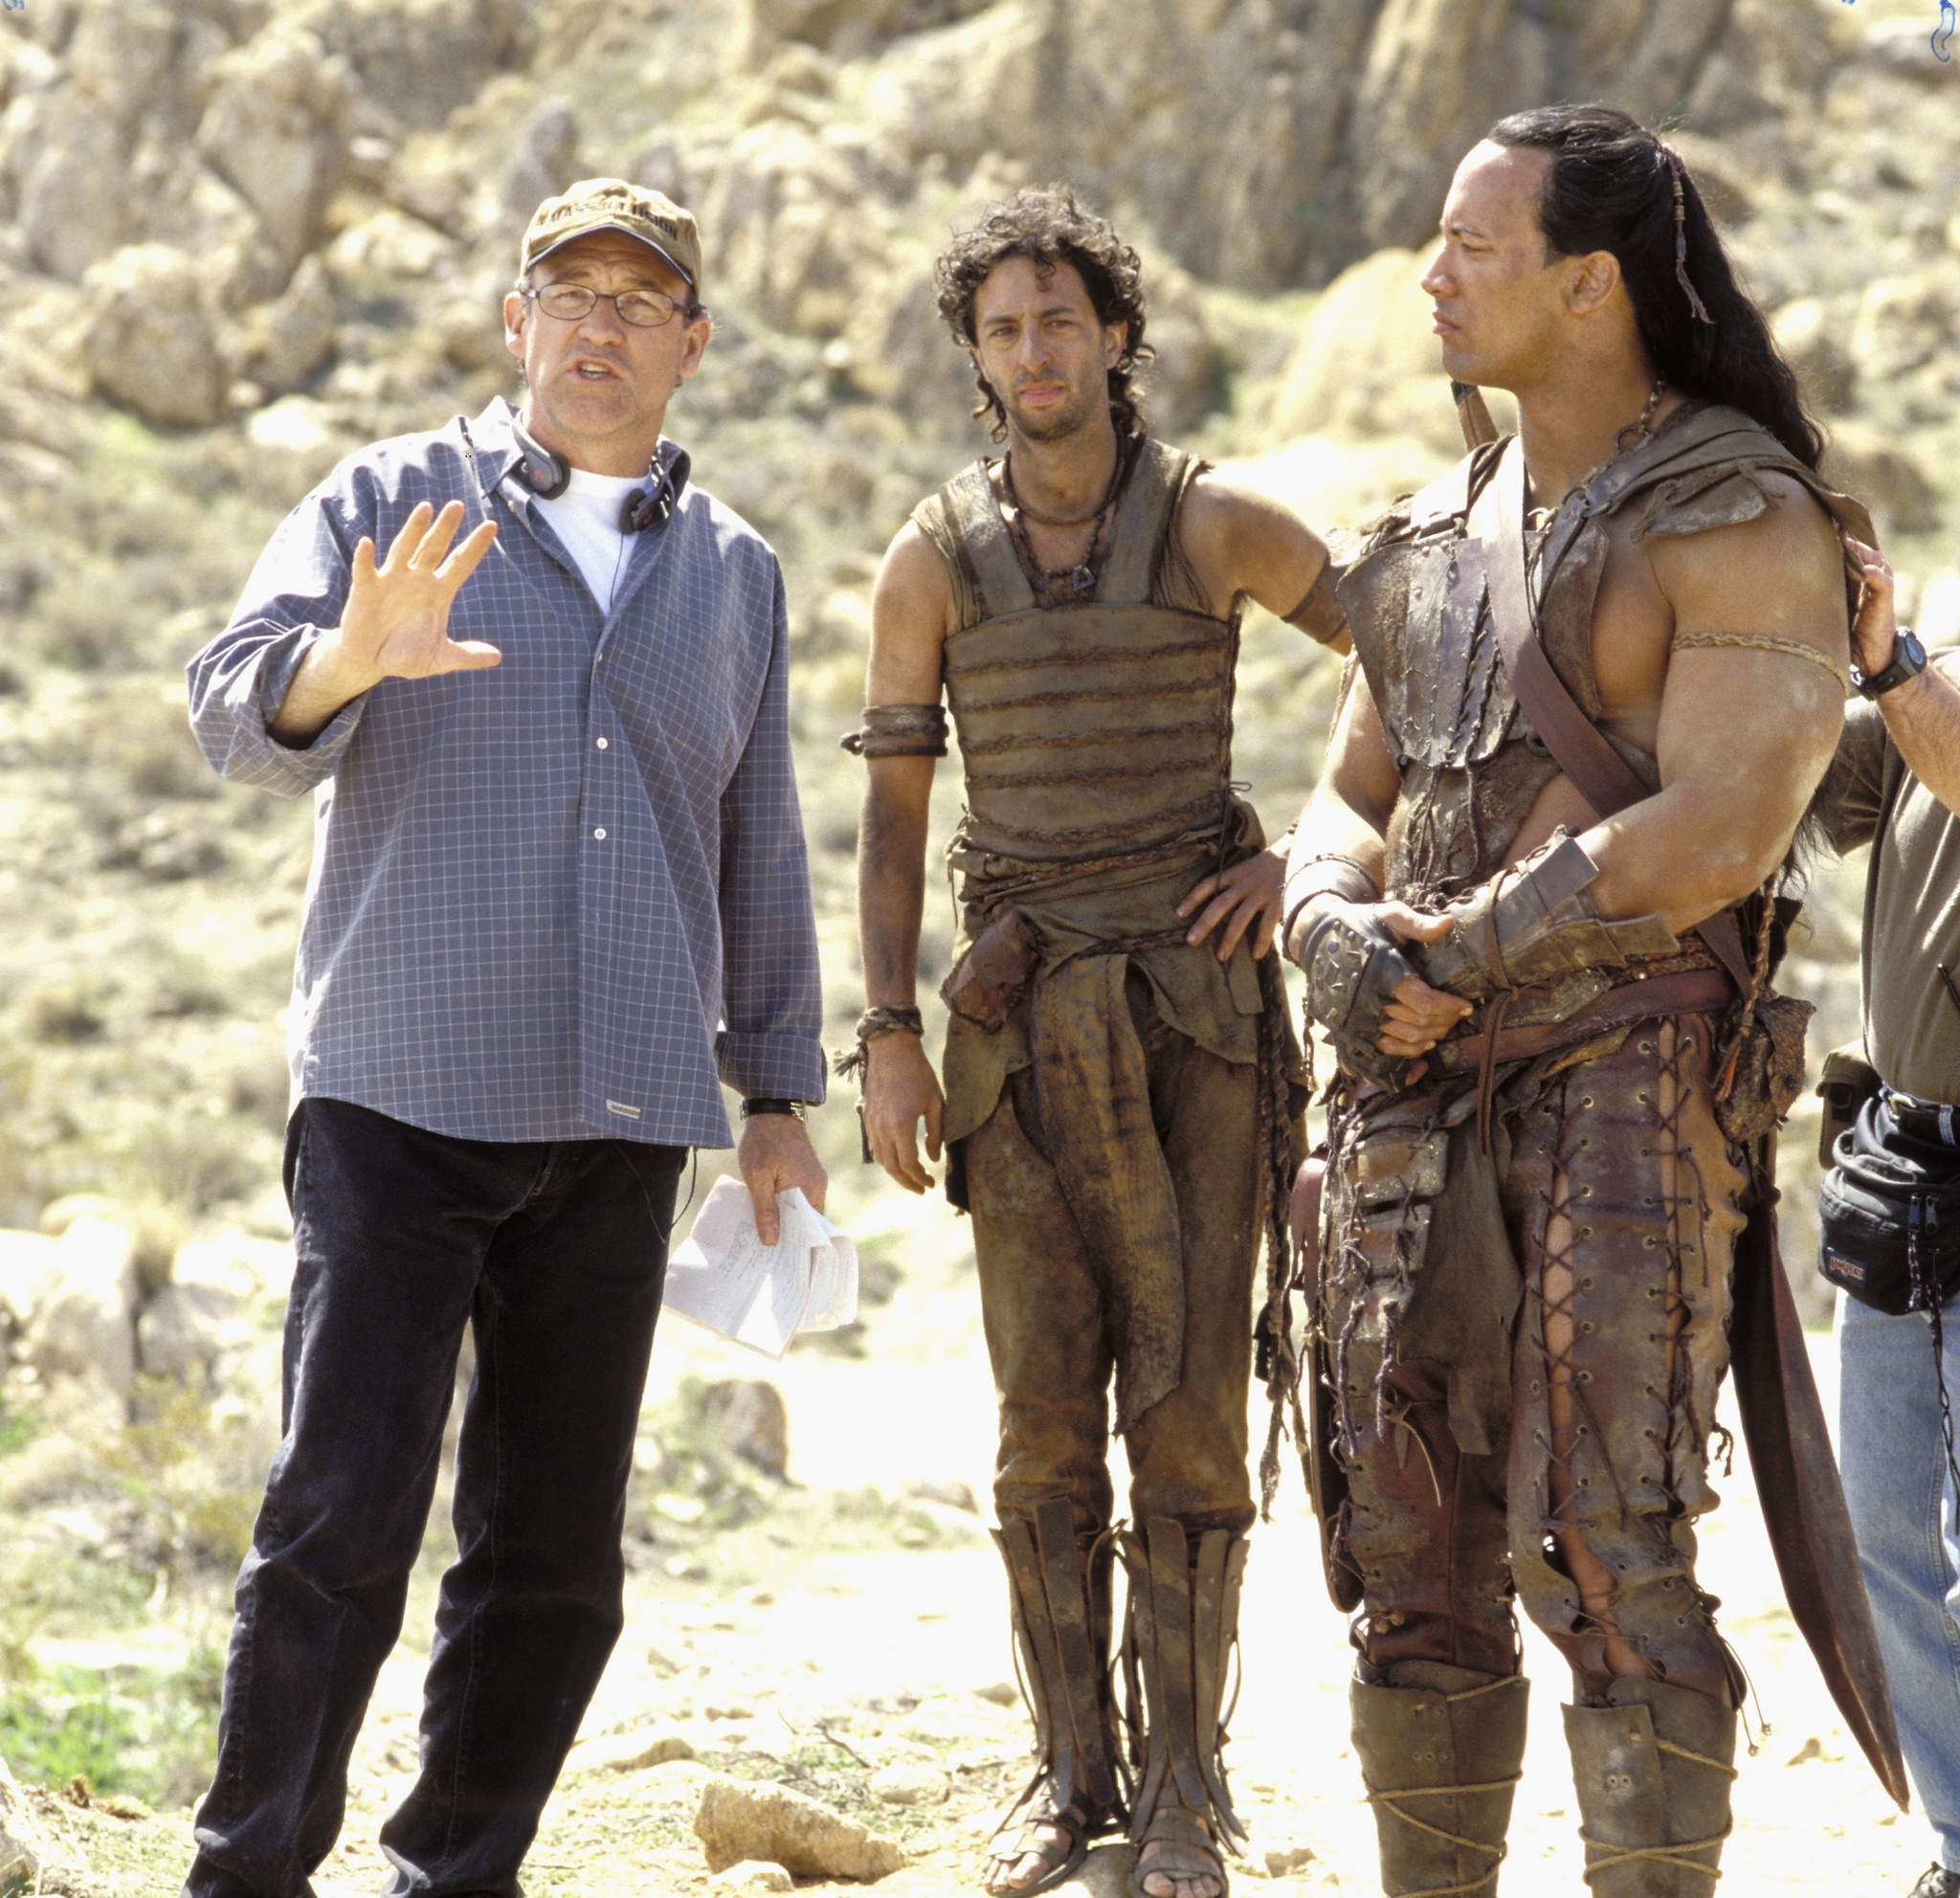 Grant Heslov, Dwayne Johnson and Chuck Russell in The Scorpion King (2002)